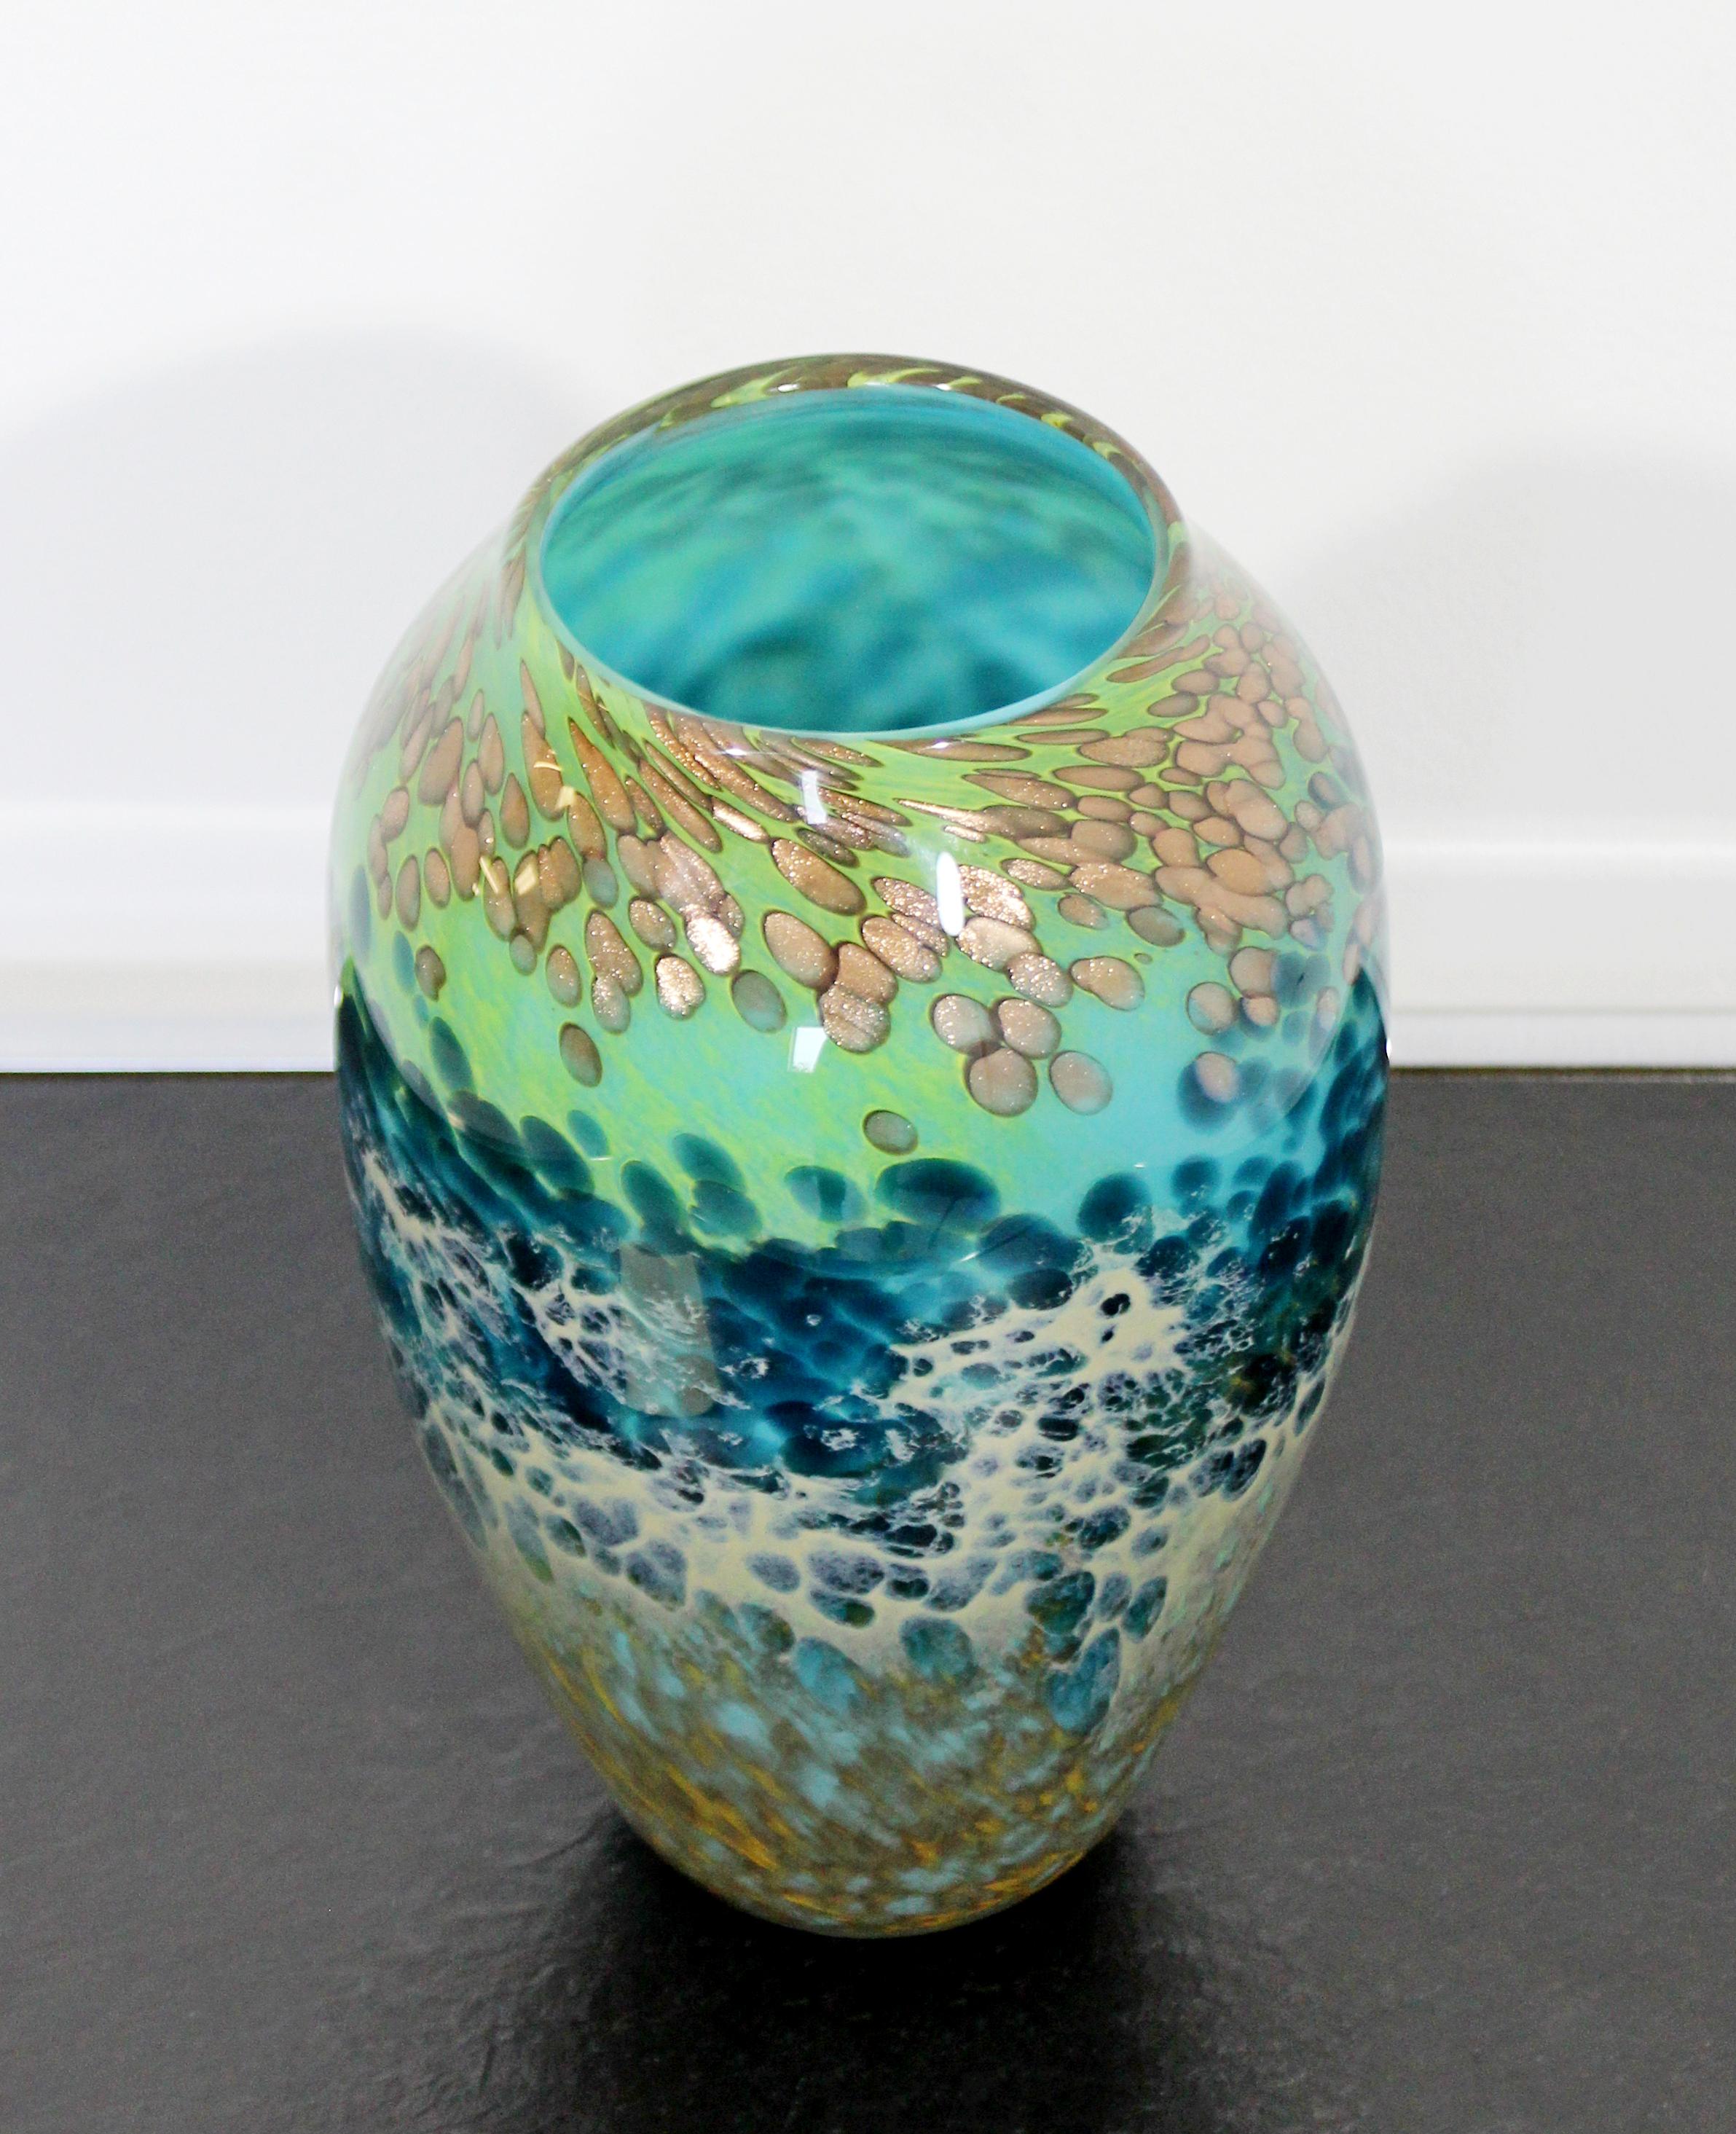 For your consideration is an incredible, ocean themed, glass art vase or vessel, signed and stamped Swan, circa 1930s. In excellent condition. The dimensions are 5.5